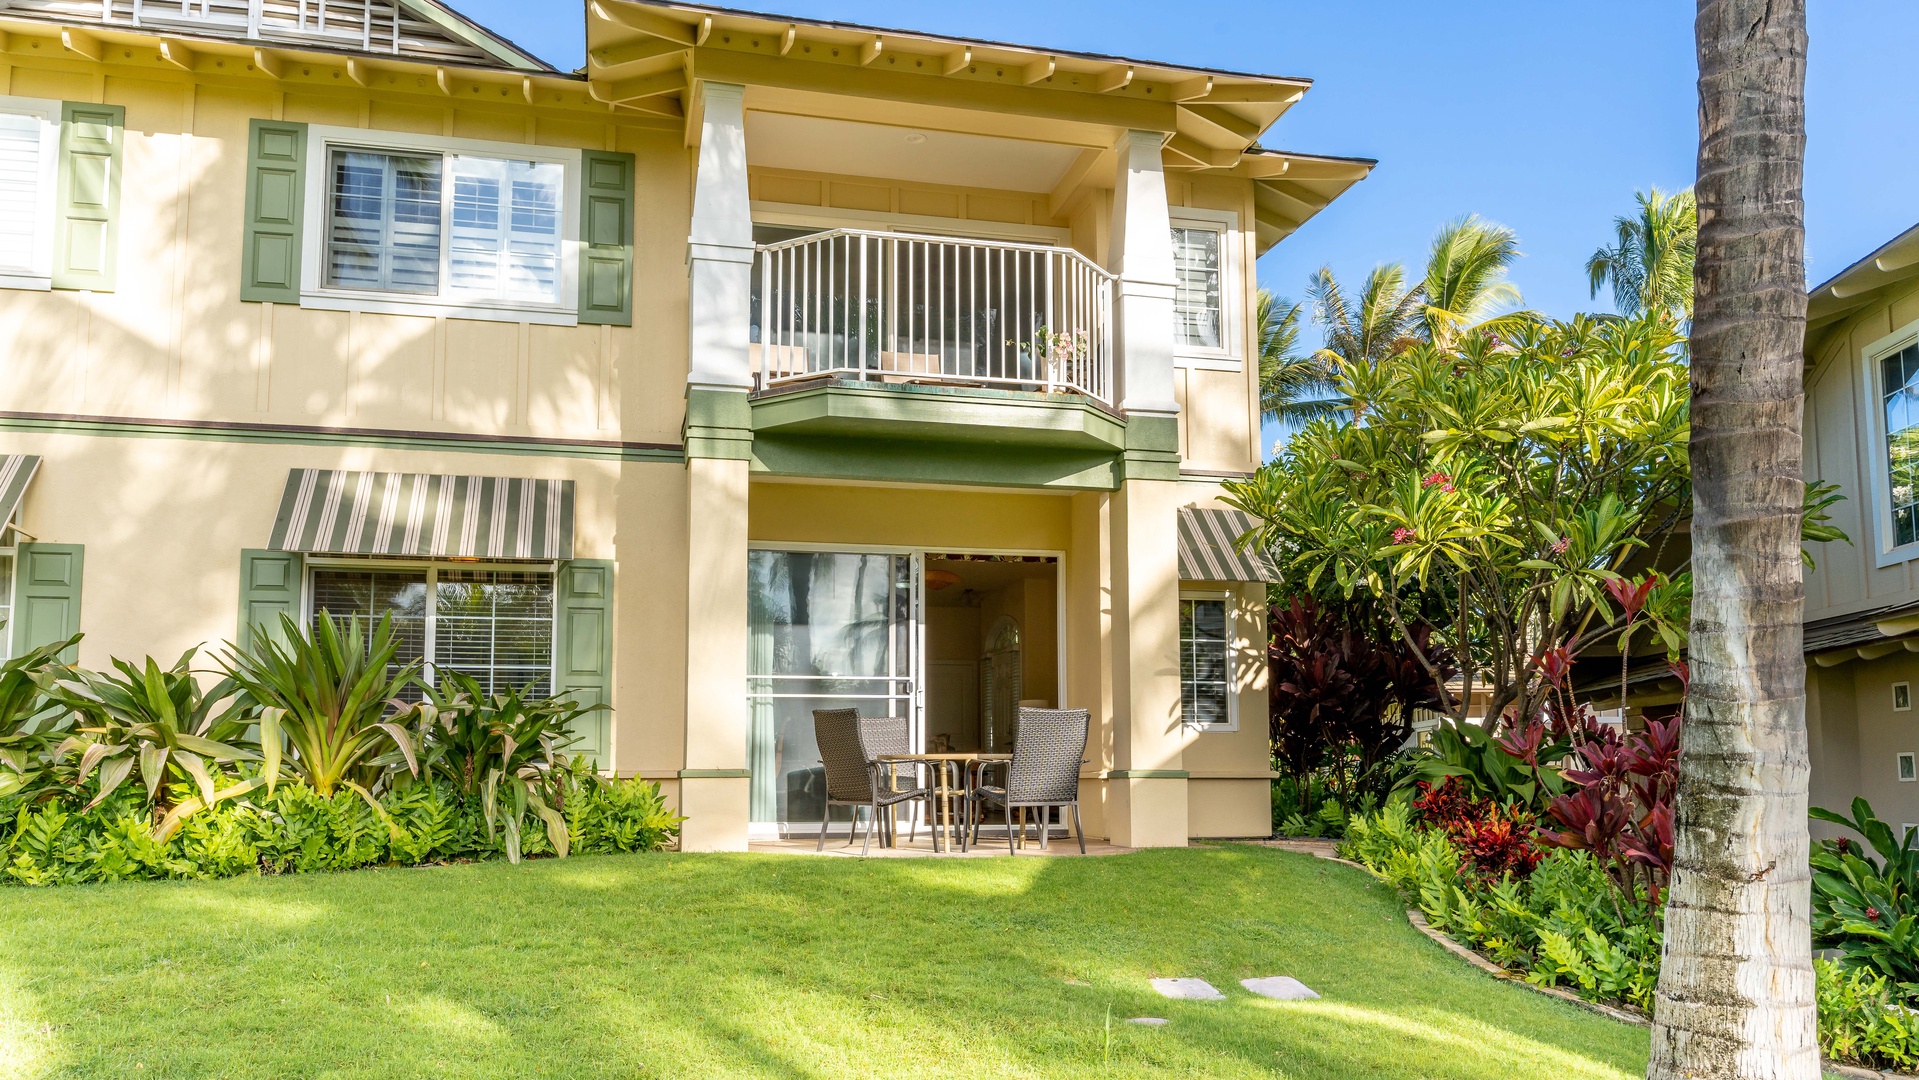 Kapolei Vacation Rentals, Kai Lani 8B - The tranquil back yard where you can dine al fresco under swaying palm trees.